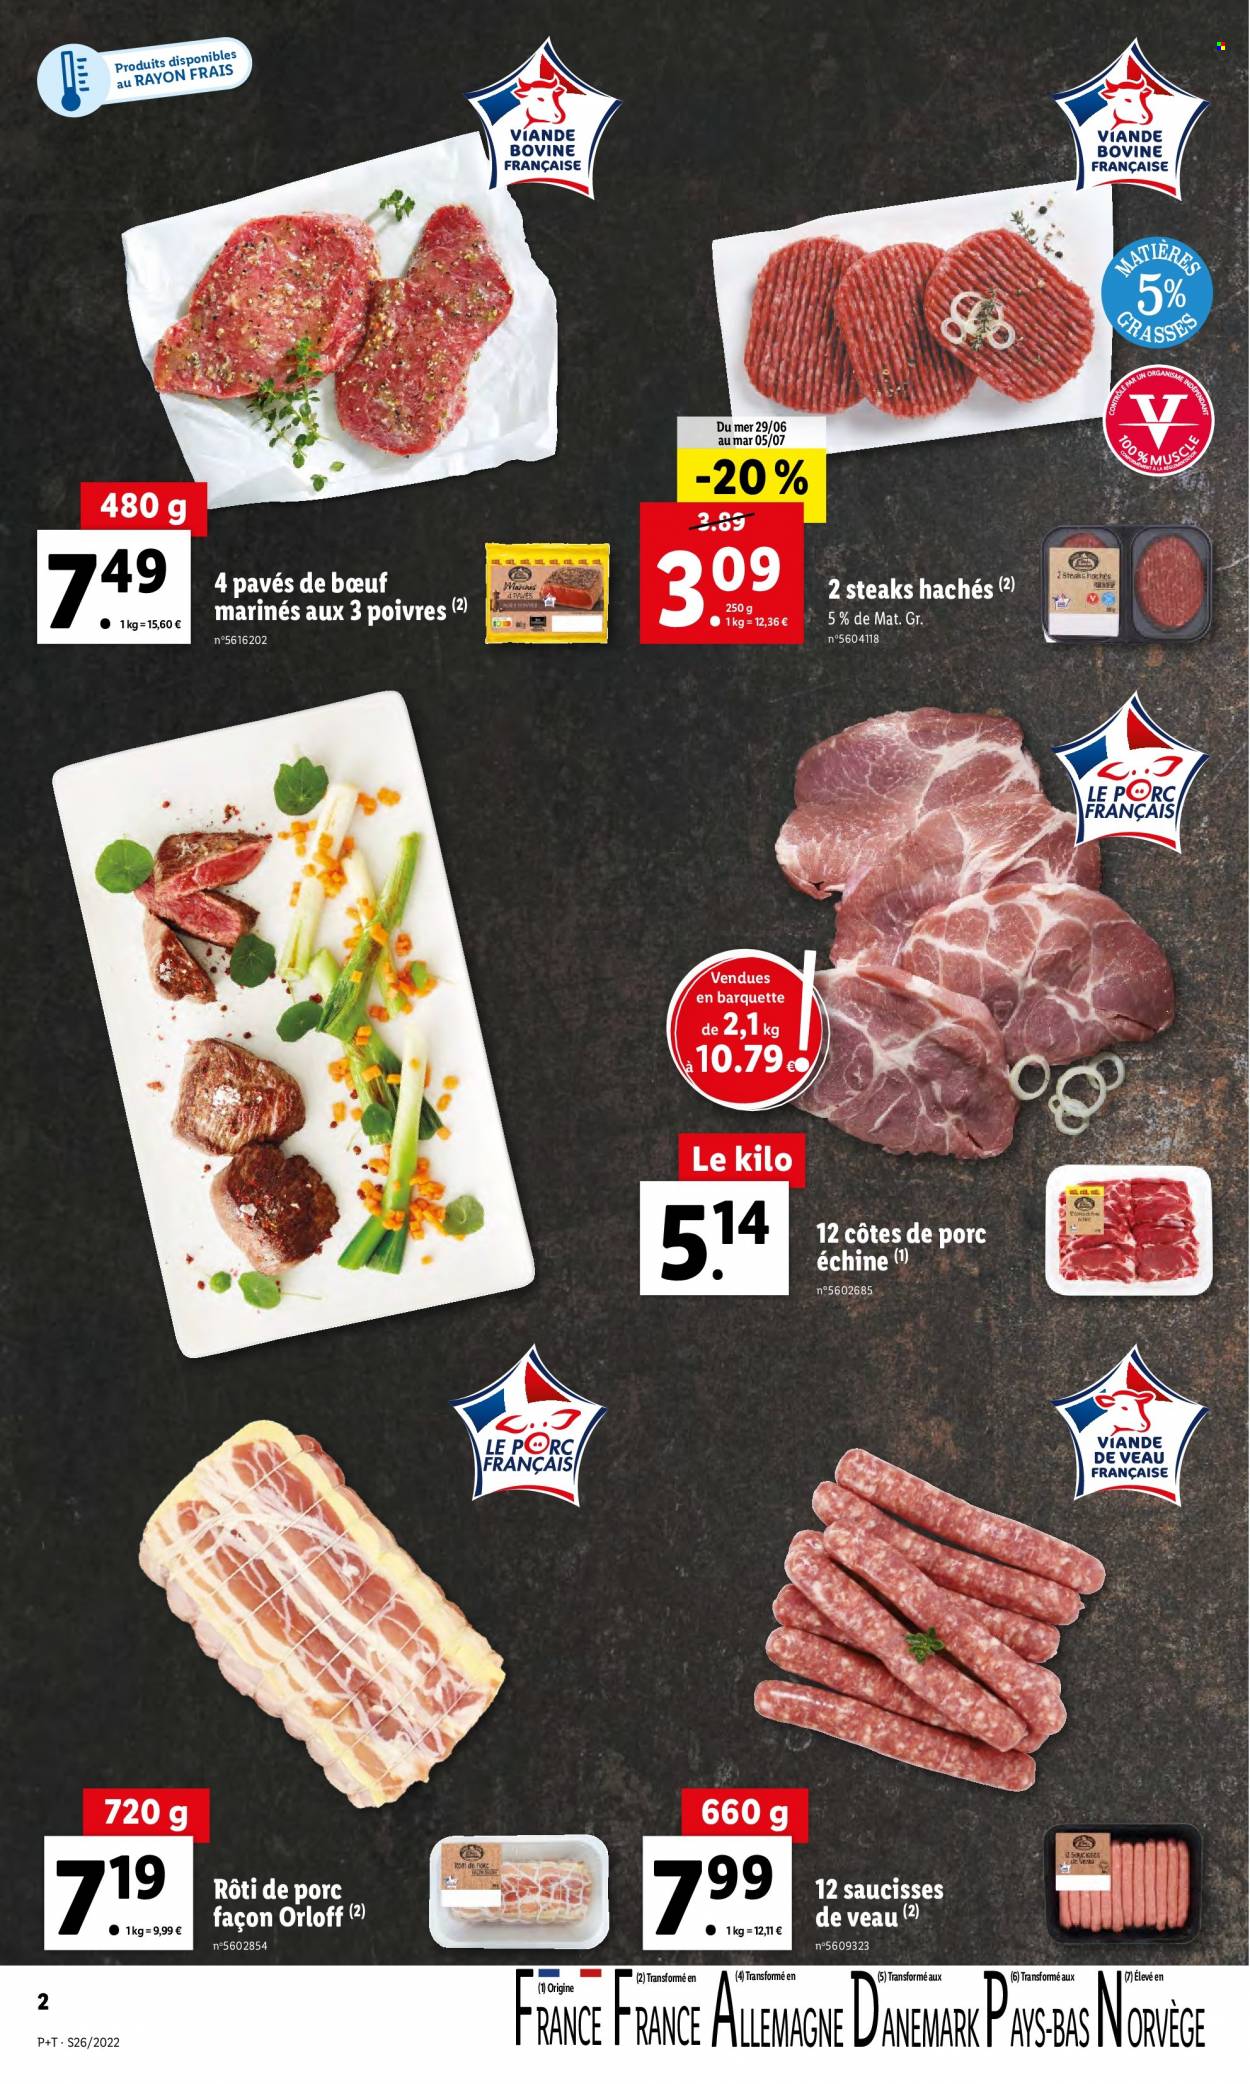 Catalogue Lidl - 29.06.2022 - 05.07.2022. Page 2.